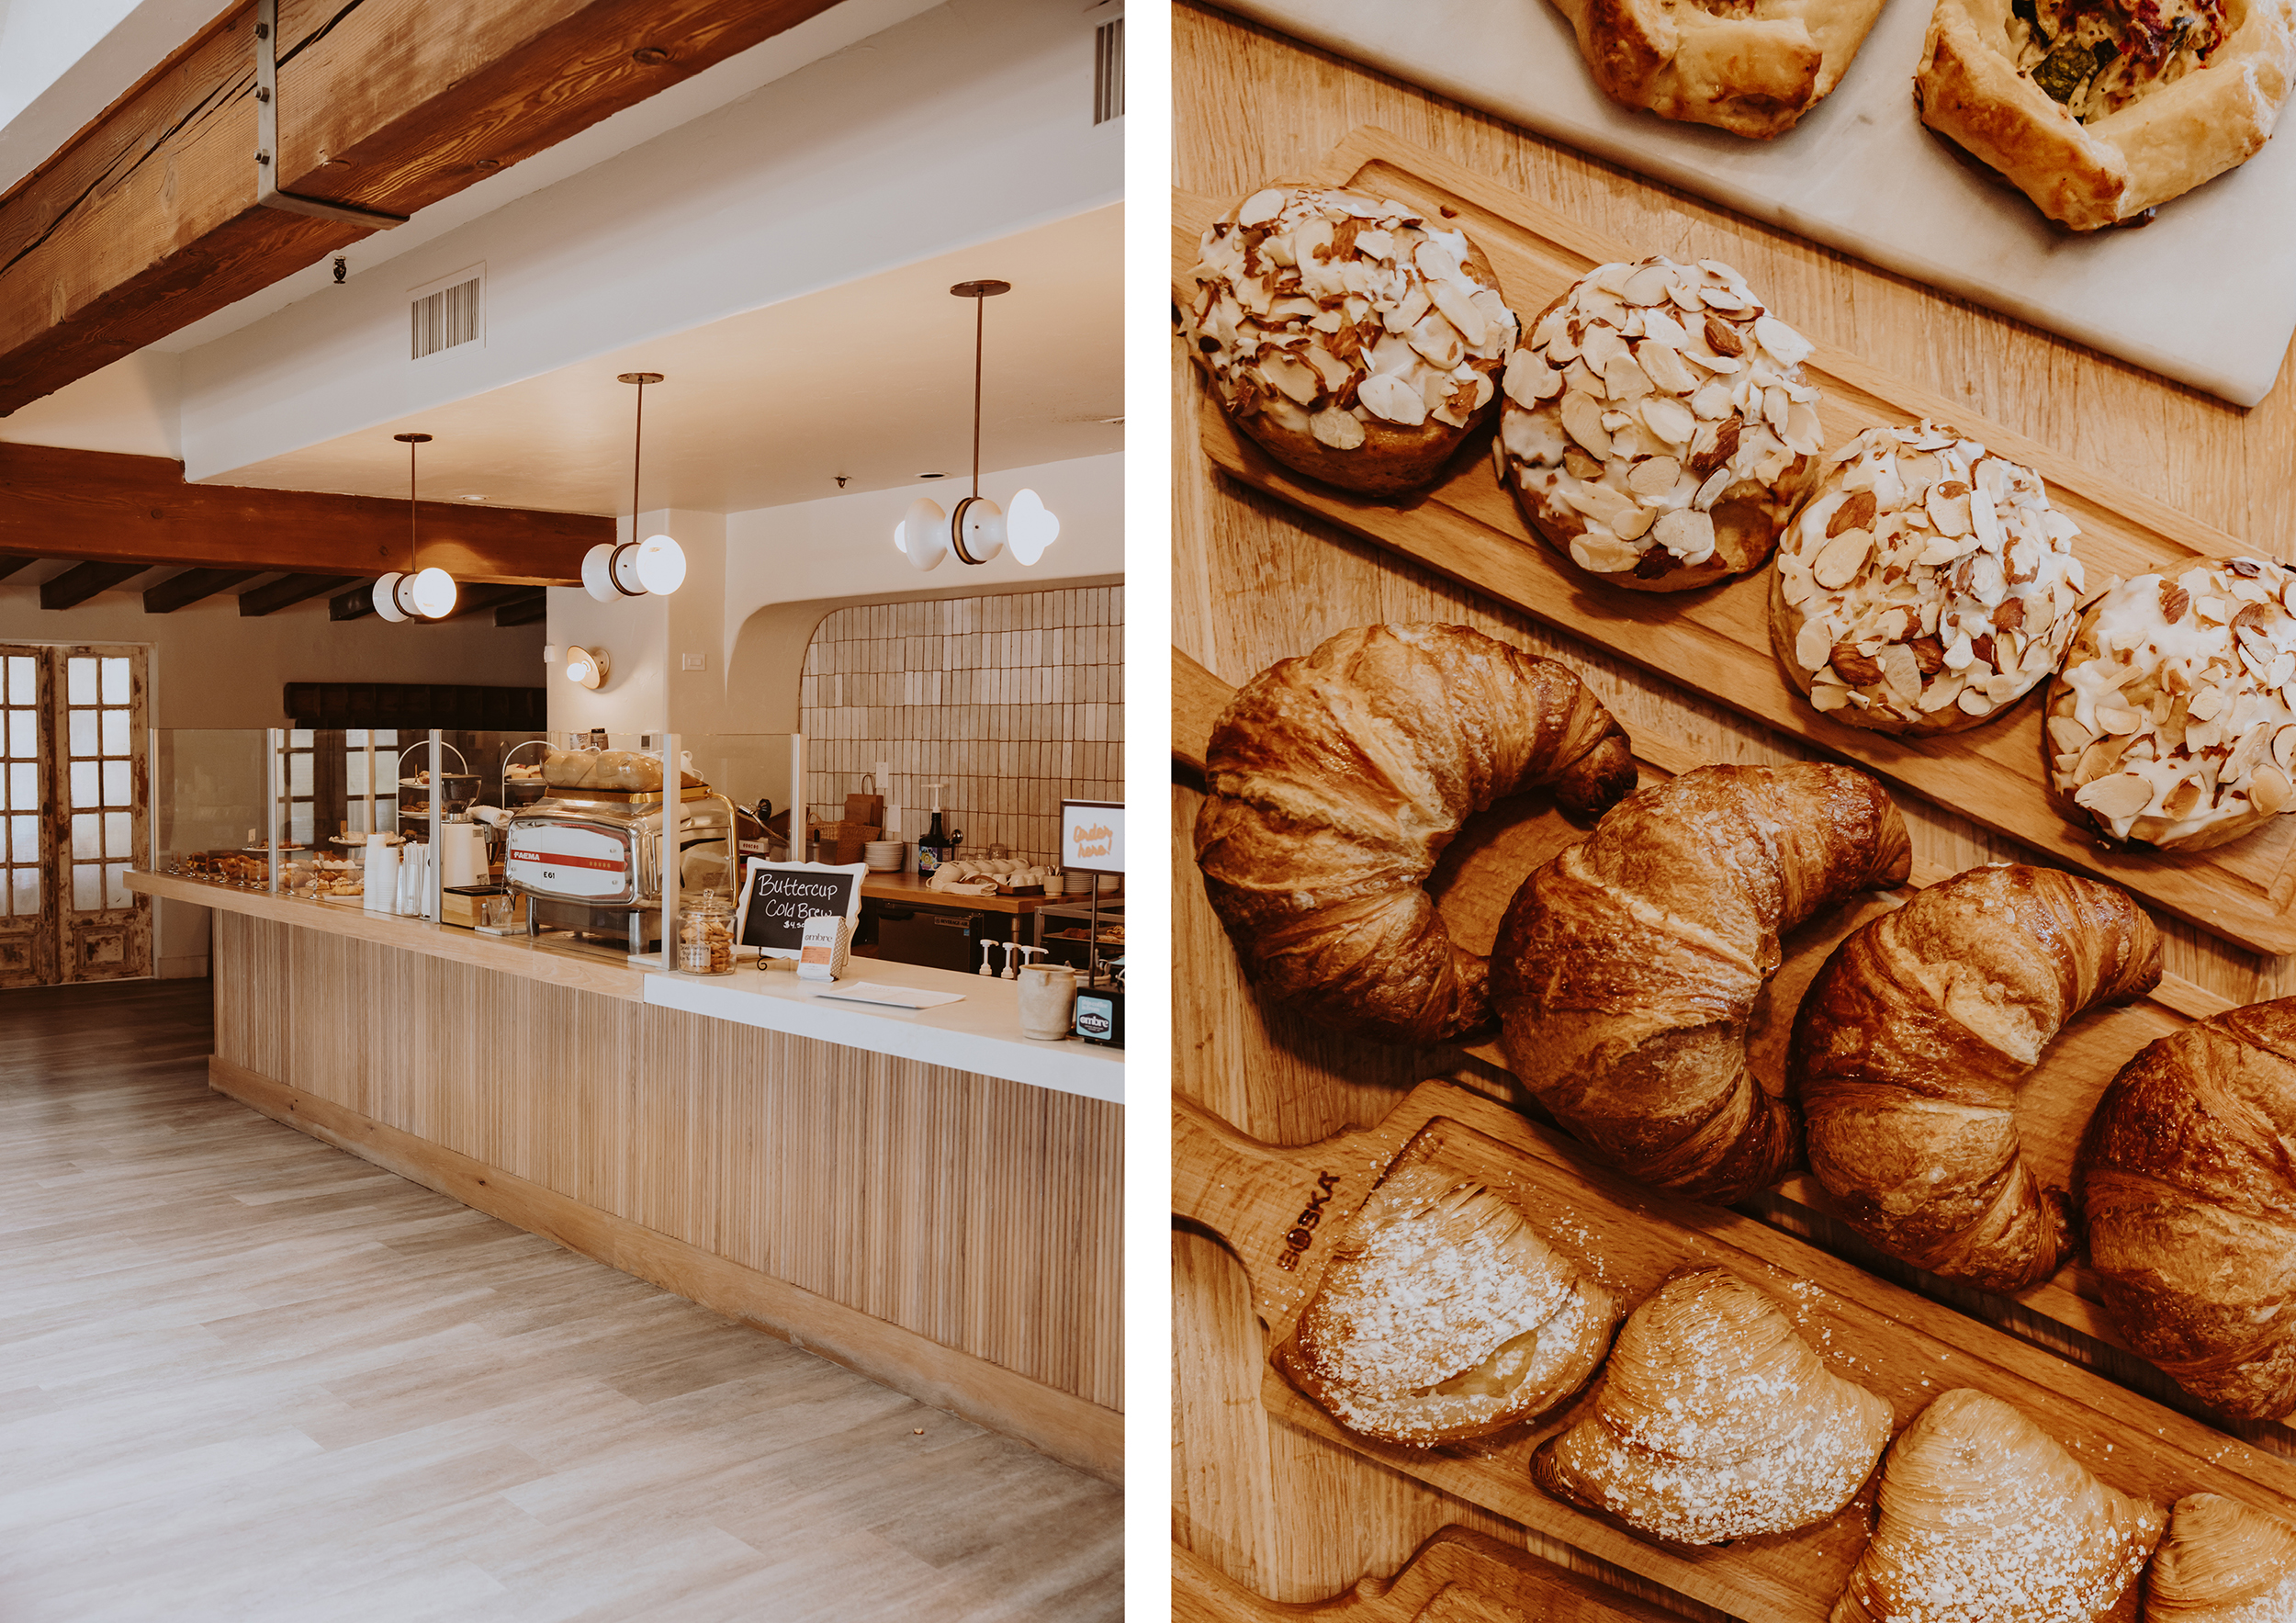 Locale Bakery and Café